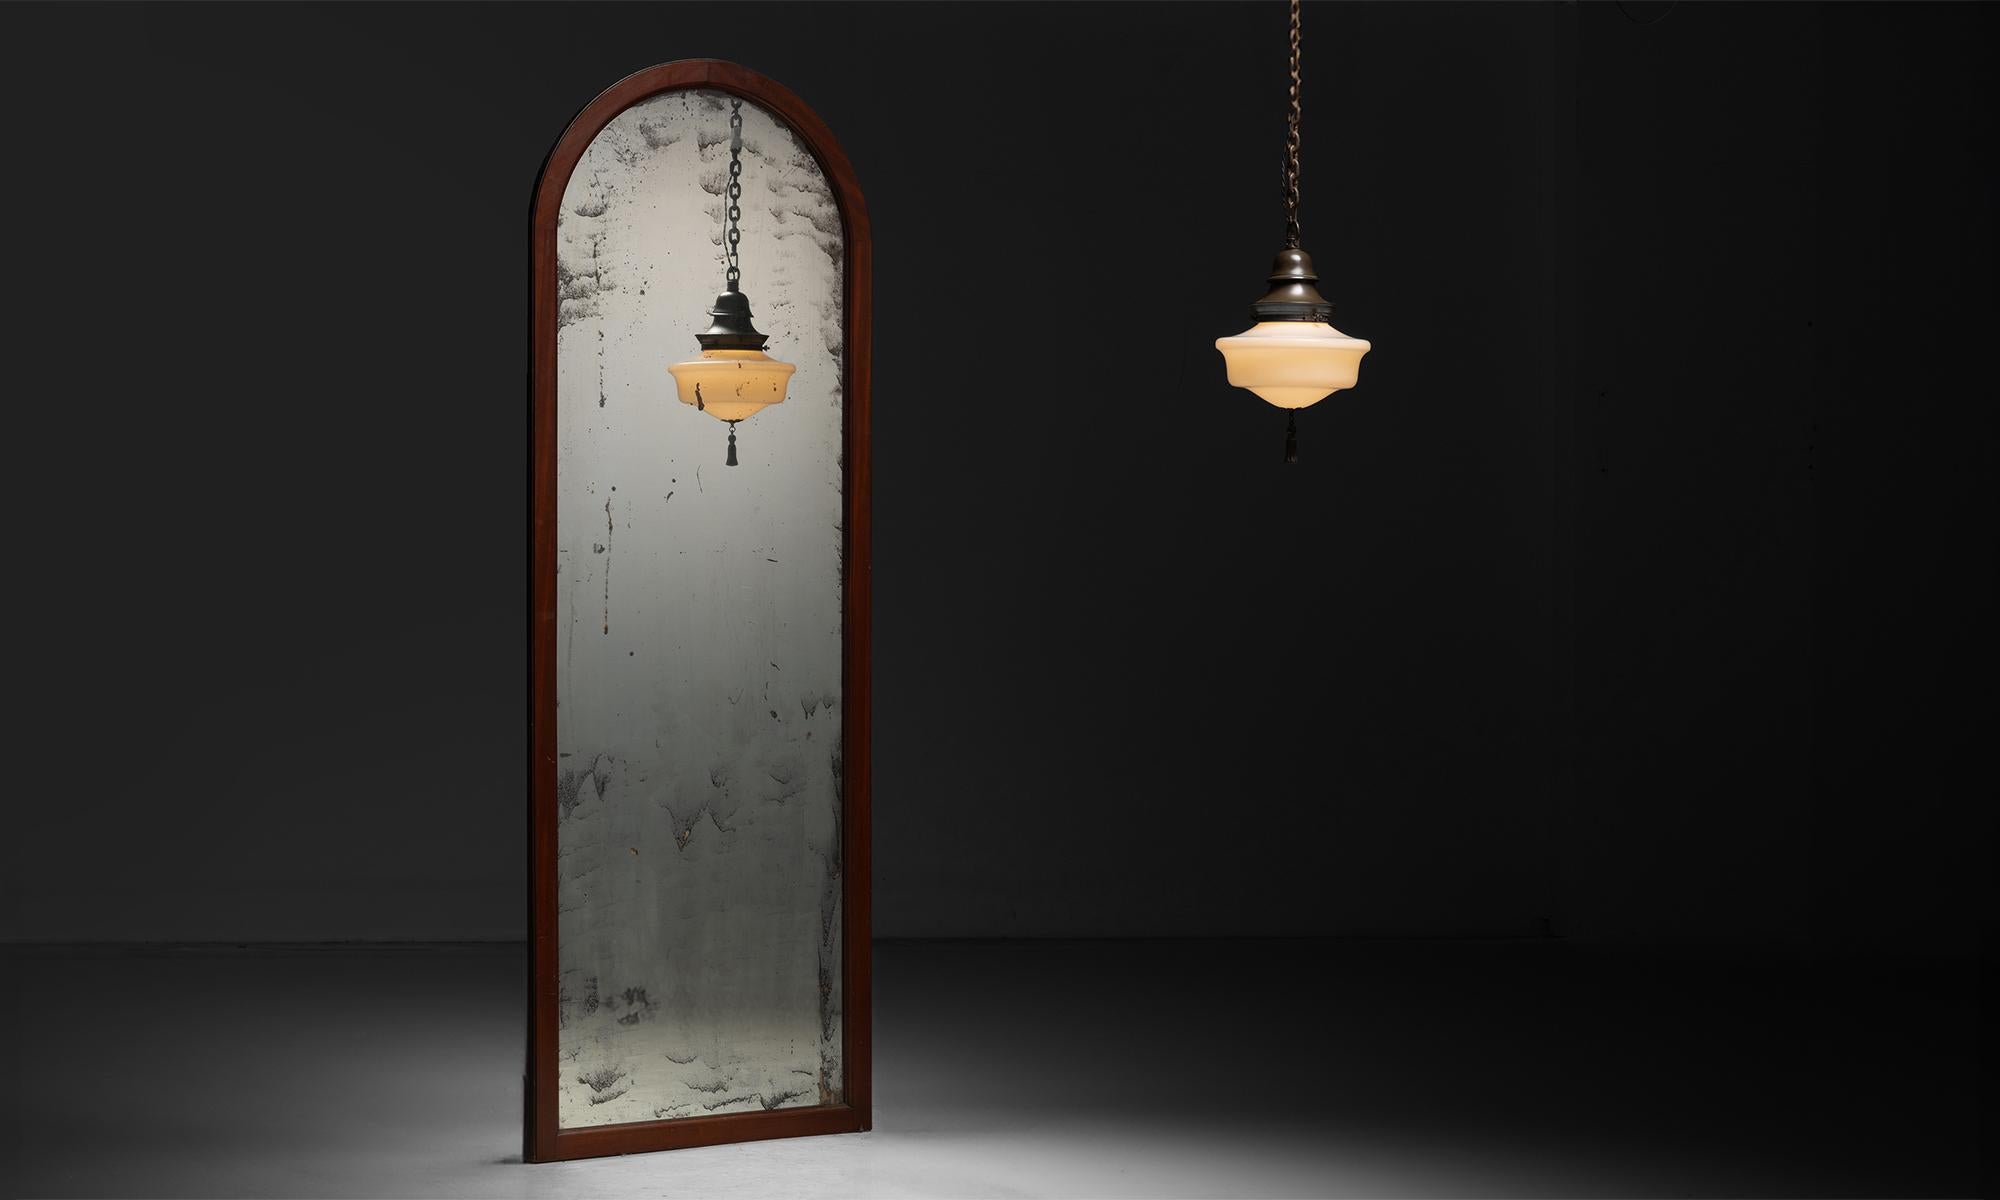 Arched Mirror

Netherlands circa 1930

Mahogany frame dressing mirror with weathered glass. Brass and milk glass pendant with tassel.

31.5”w x 1.5”d x 89”h